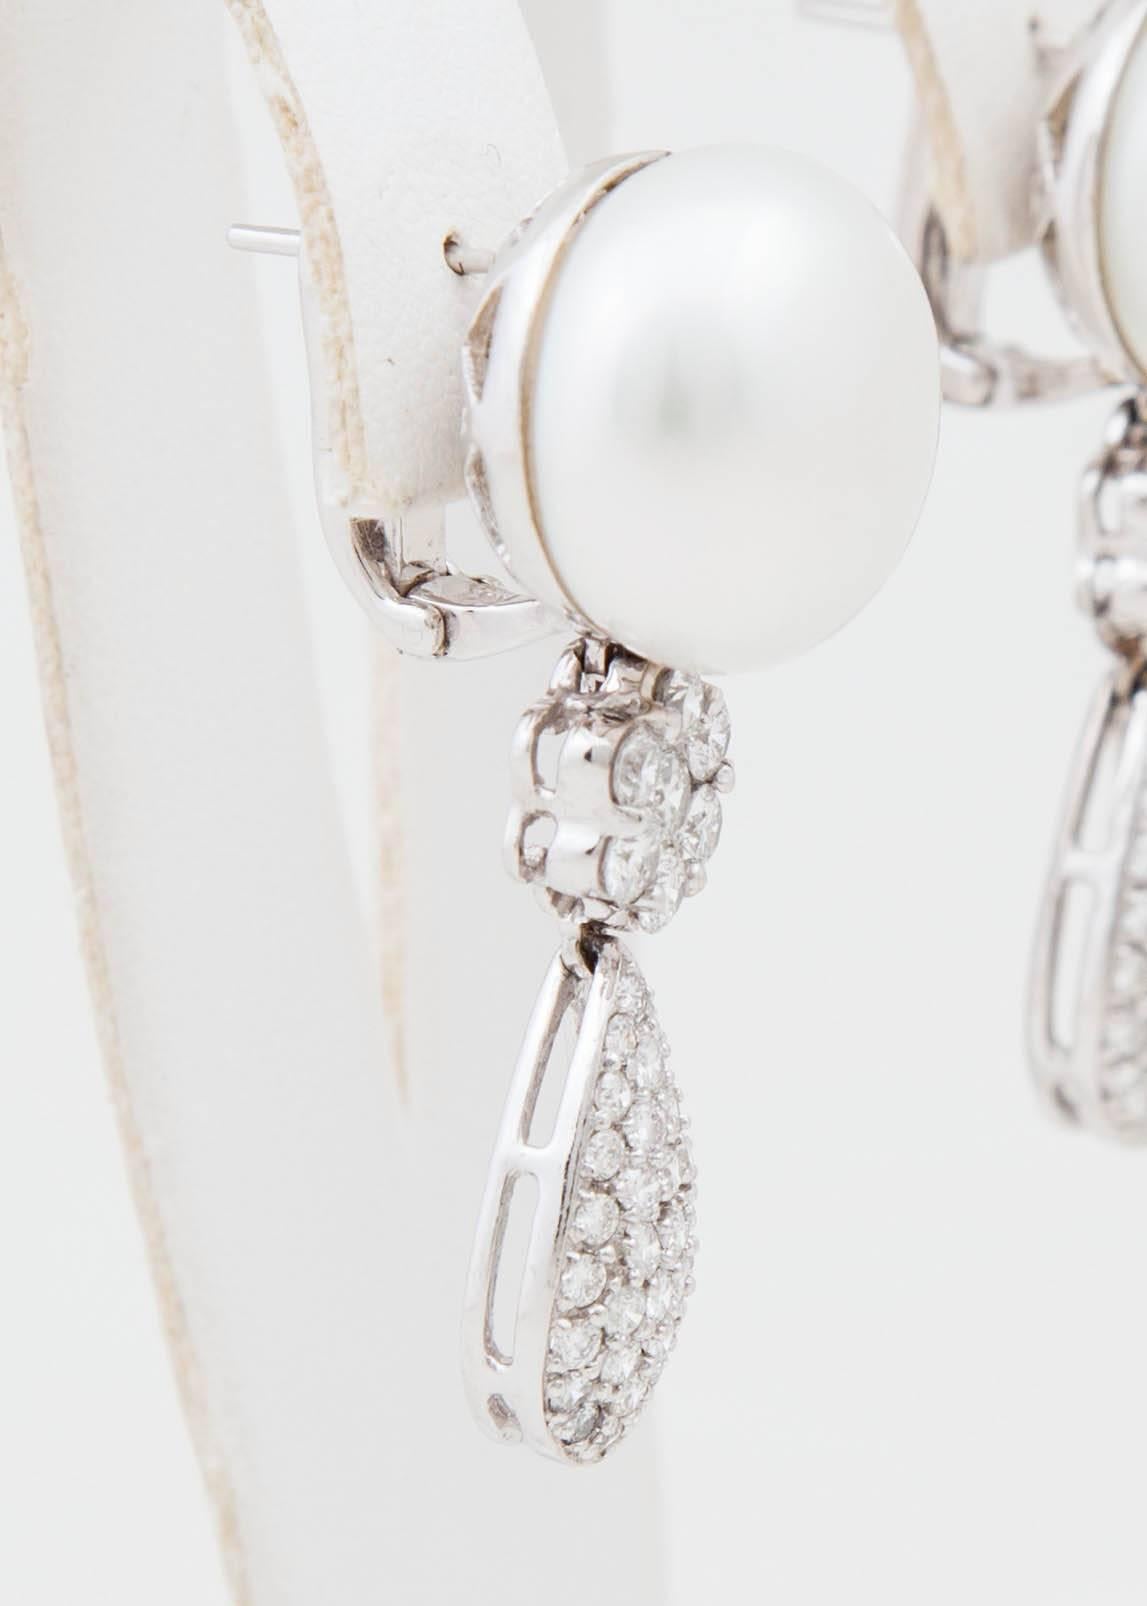 These beautiful White South Sea and Diamond earrings make quite the statement! They consist of 16x17 natural color White South Sea cultured pearls and 2.86ct of white diamonds that hang from the pearl set in platinum. These earrings have an omega